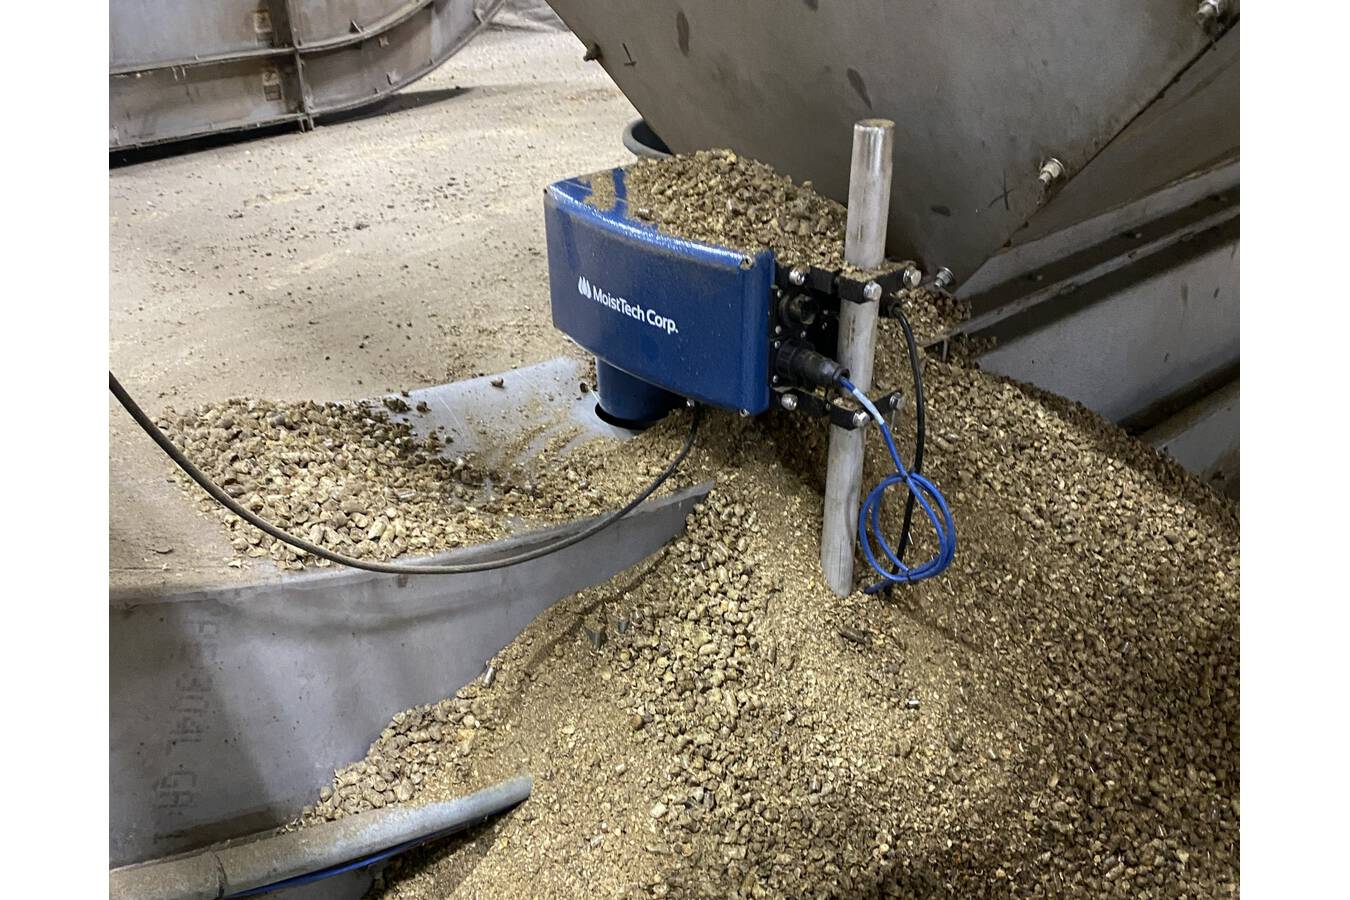 Moisture measurement Systems can decrease human error Moisture content can affect product quality and equipment function, making it a crucial focus point in proactive avoidance of quality control issues. 